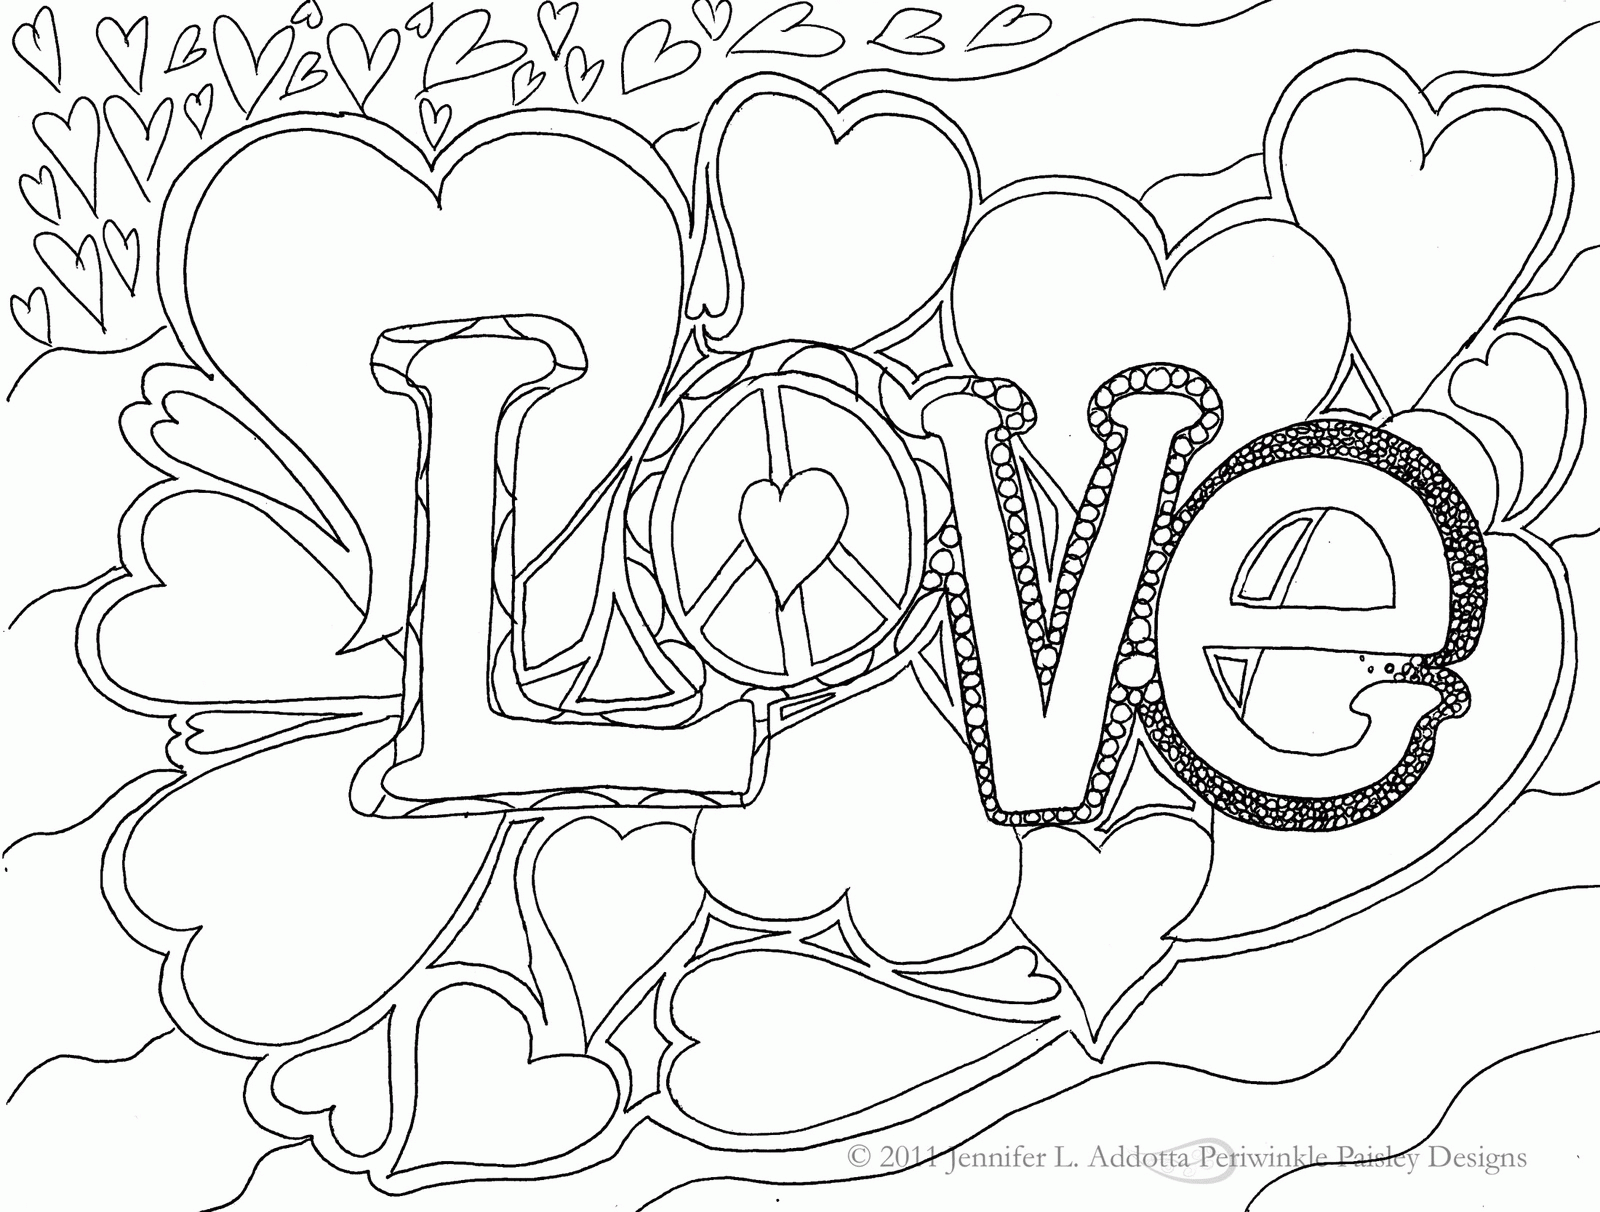 Cute Coloring Pictures For Kids - Coloring Pages for Kids and for ...